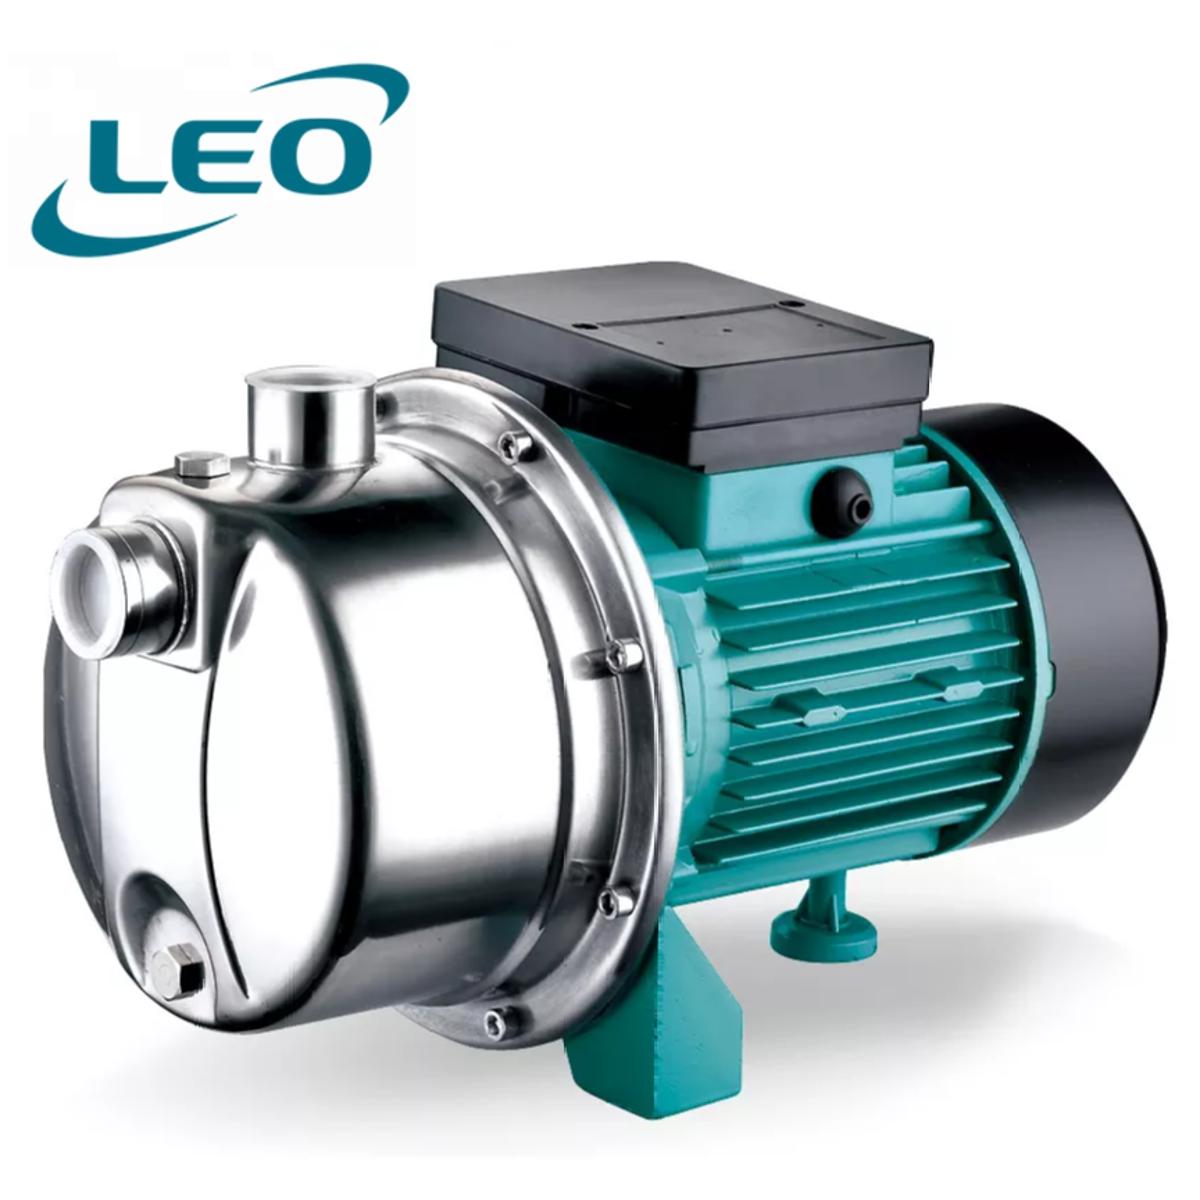 LEO - 5XCM-120C - 900W - 1.2 HP -  Stainless Steel Multistage Centrifugal Pump- 180V~220V SINGLE PHASE- SIZE:- 1" X 1"- European STANDARD